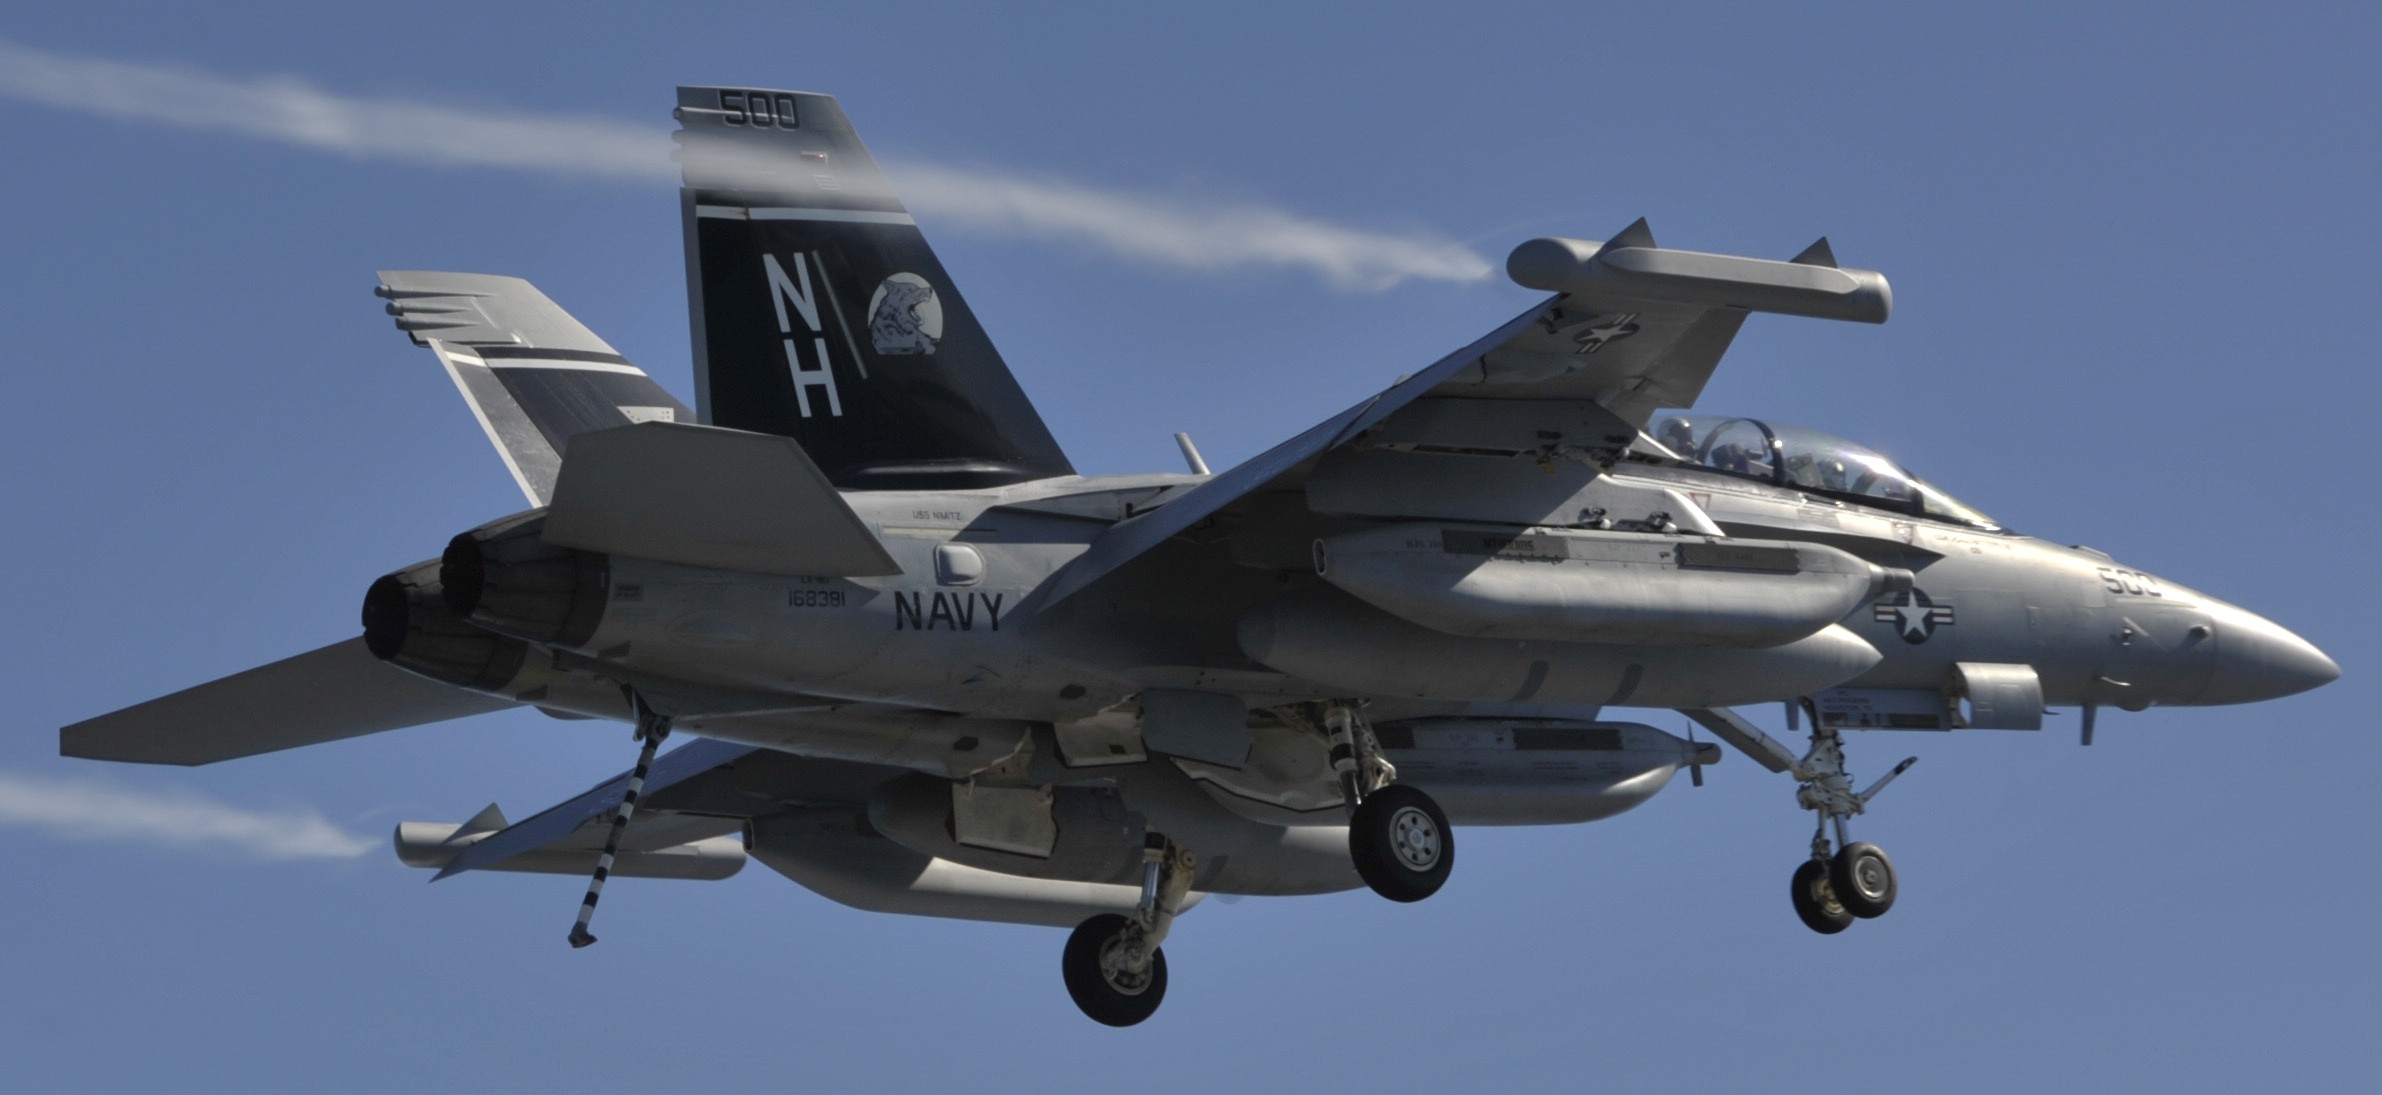 vaq-142 gray wolves electronic attack squadron ea-18g growler us navy boeing nas whidbey island cvw uss 89x